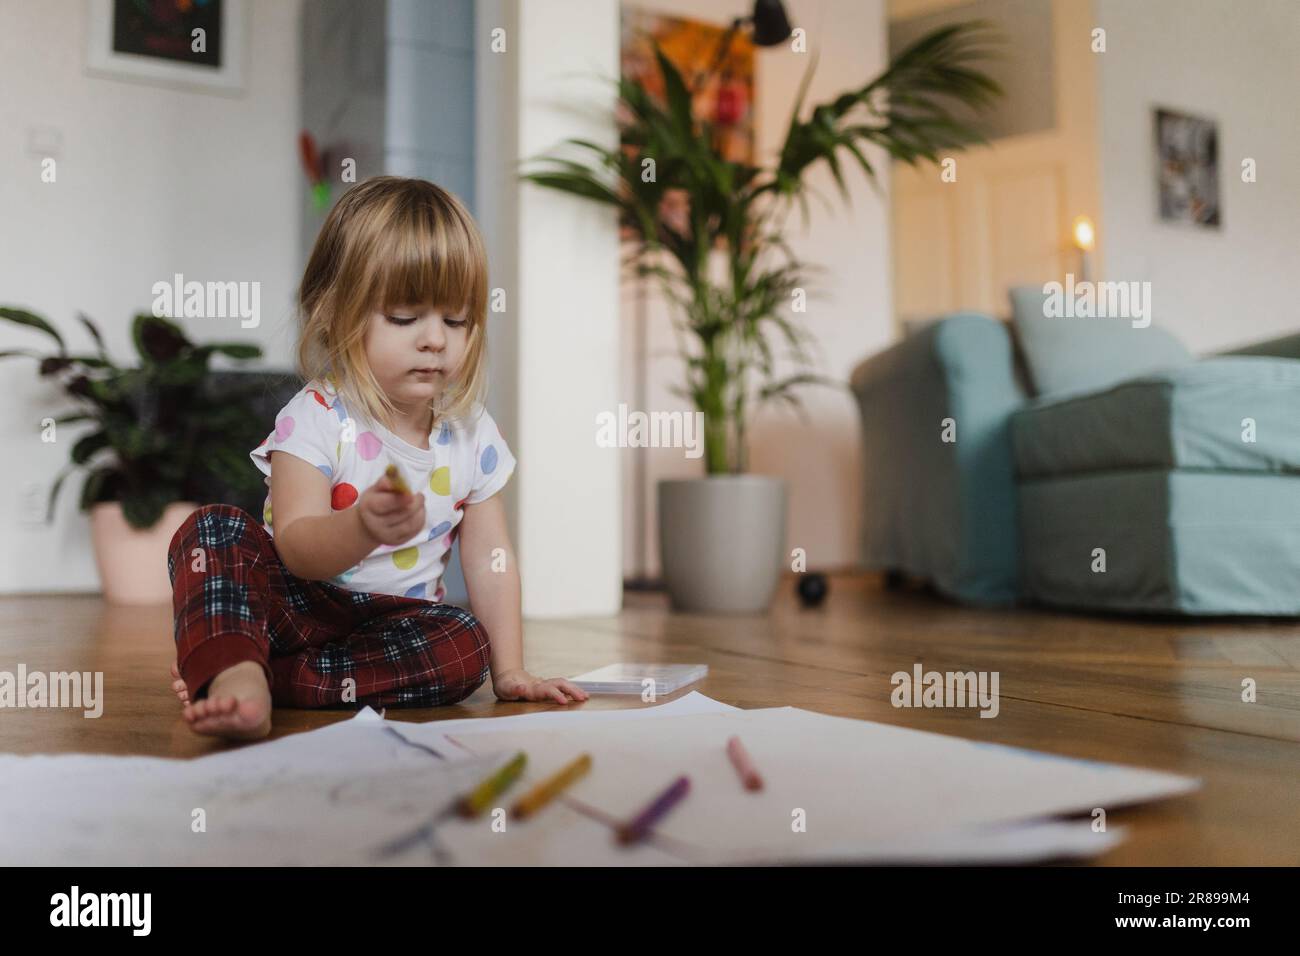 Cute little girl drawing with crayons, sitting on the floor at home. Stock Photo